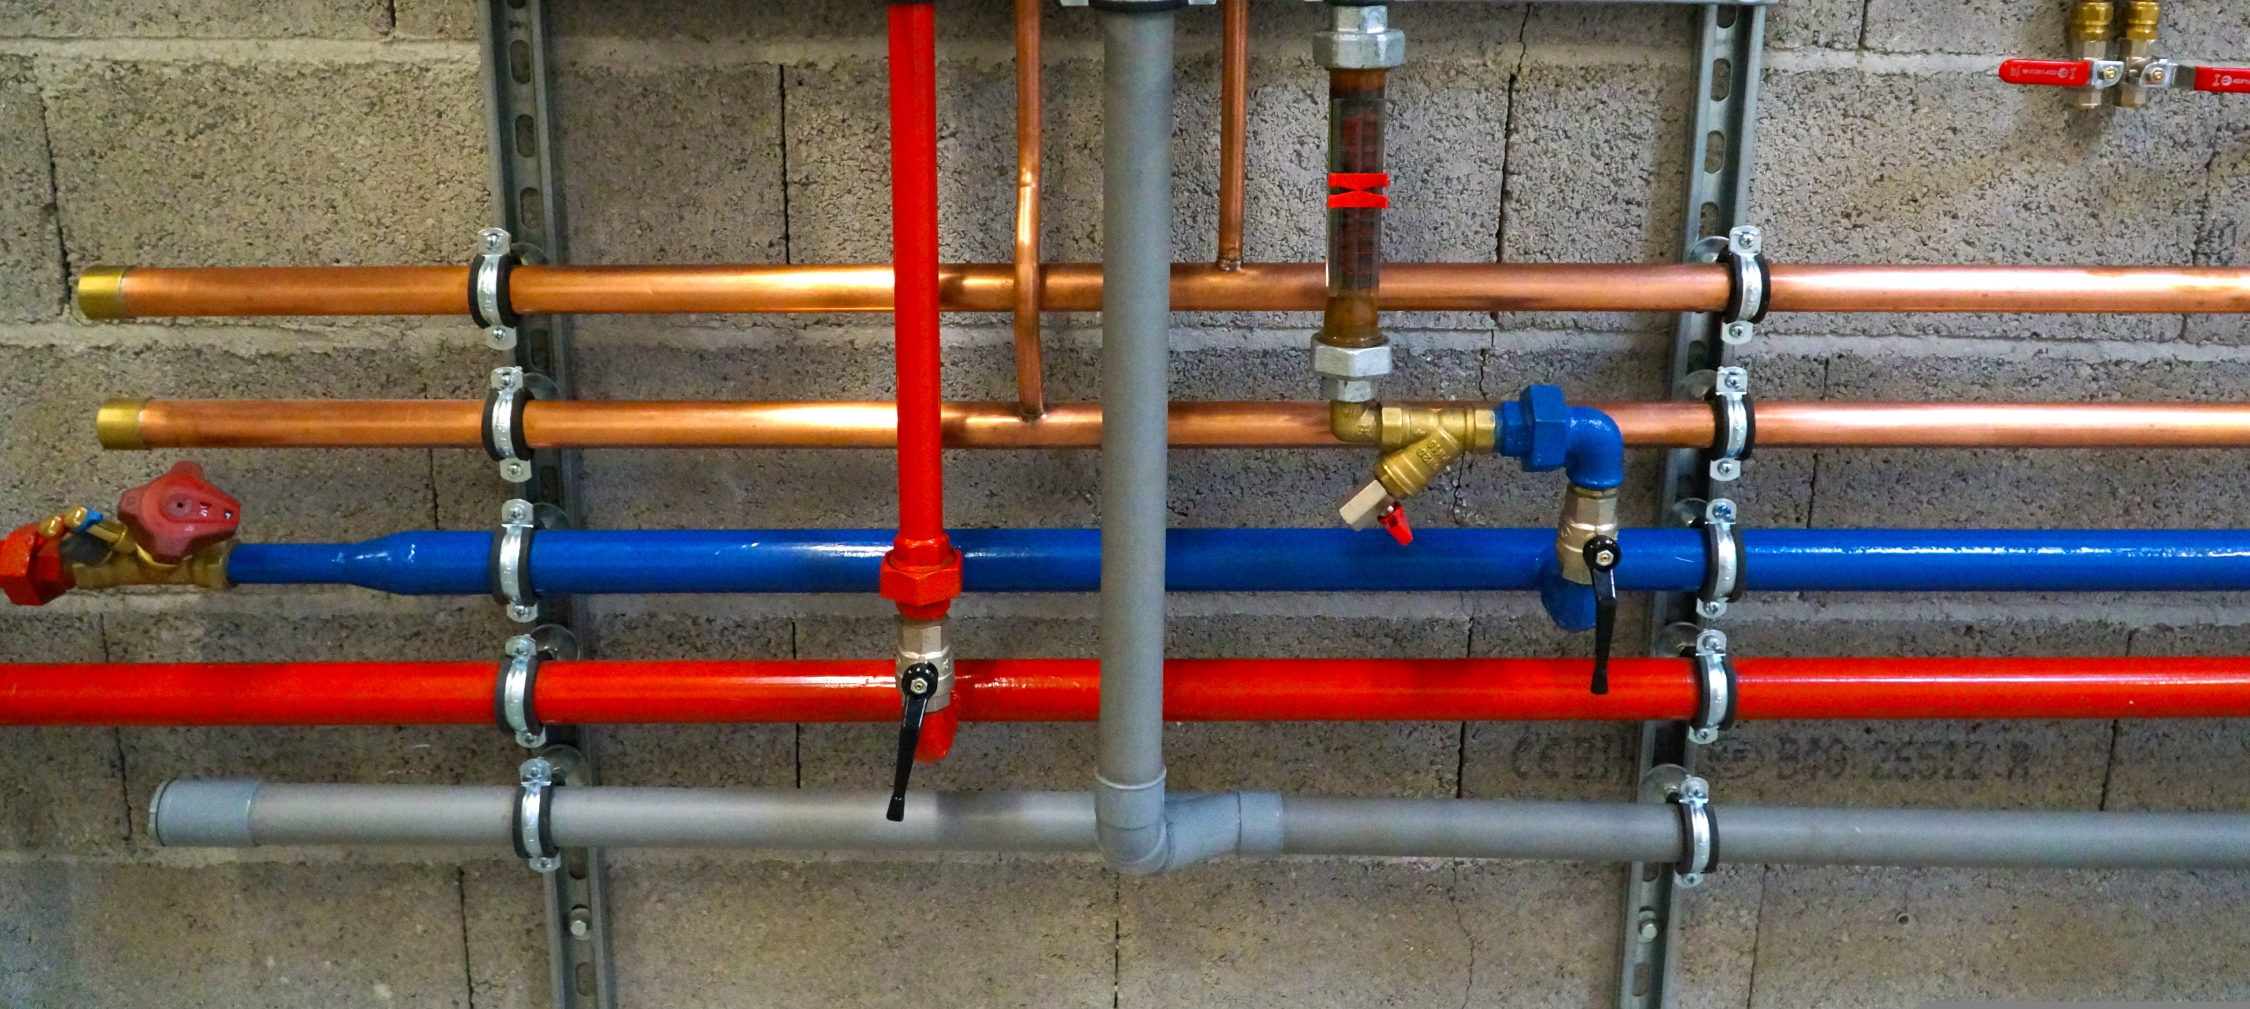 Case Study: Domestic Copper Pipe Leaking Joint Repair